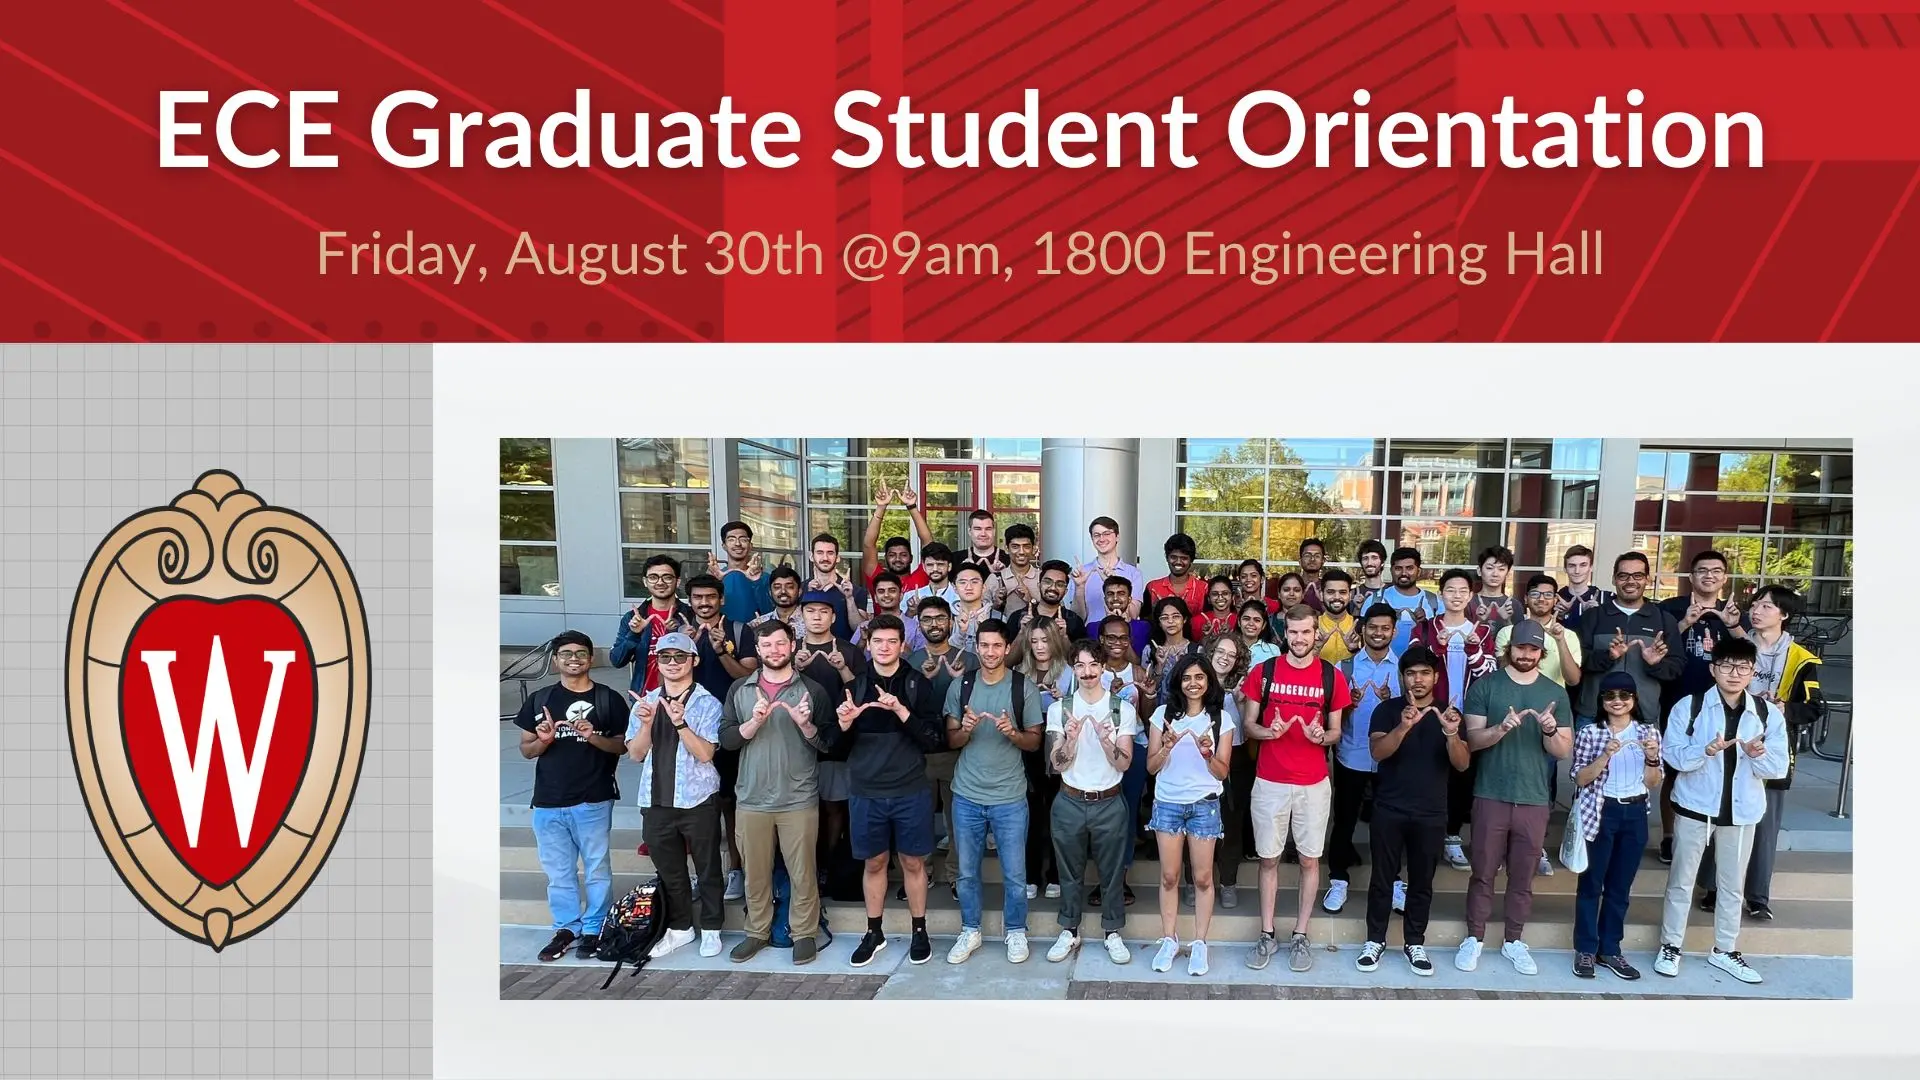 "ECE Grad Student Orientation August 20 @ 9:00, 1800 Engineering Hall" grad students standing in front of hall